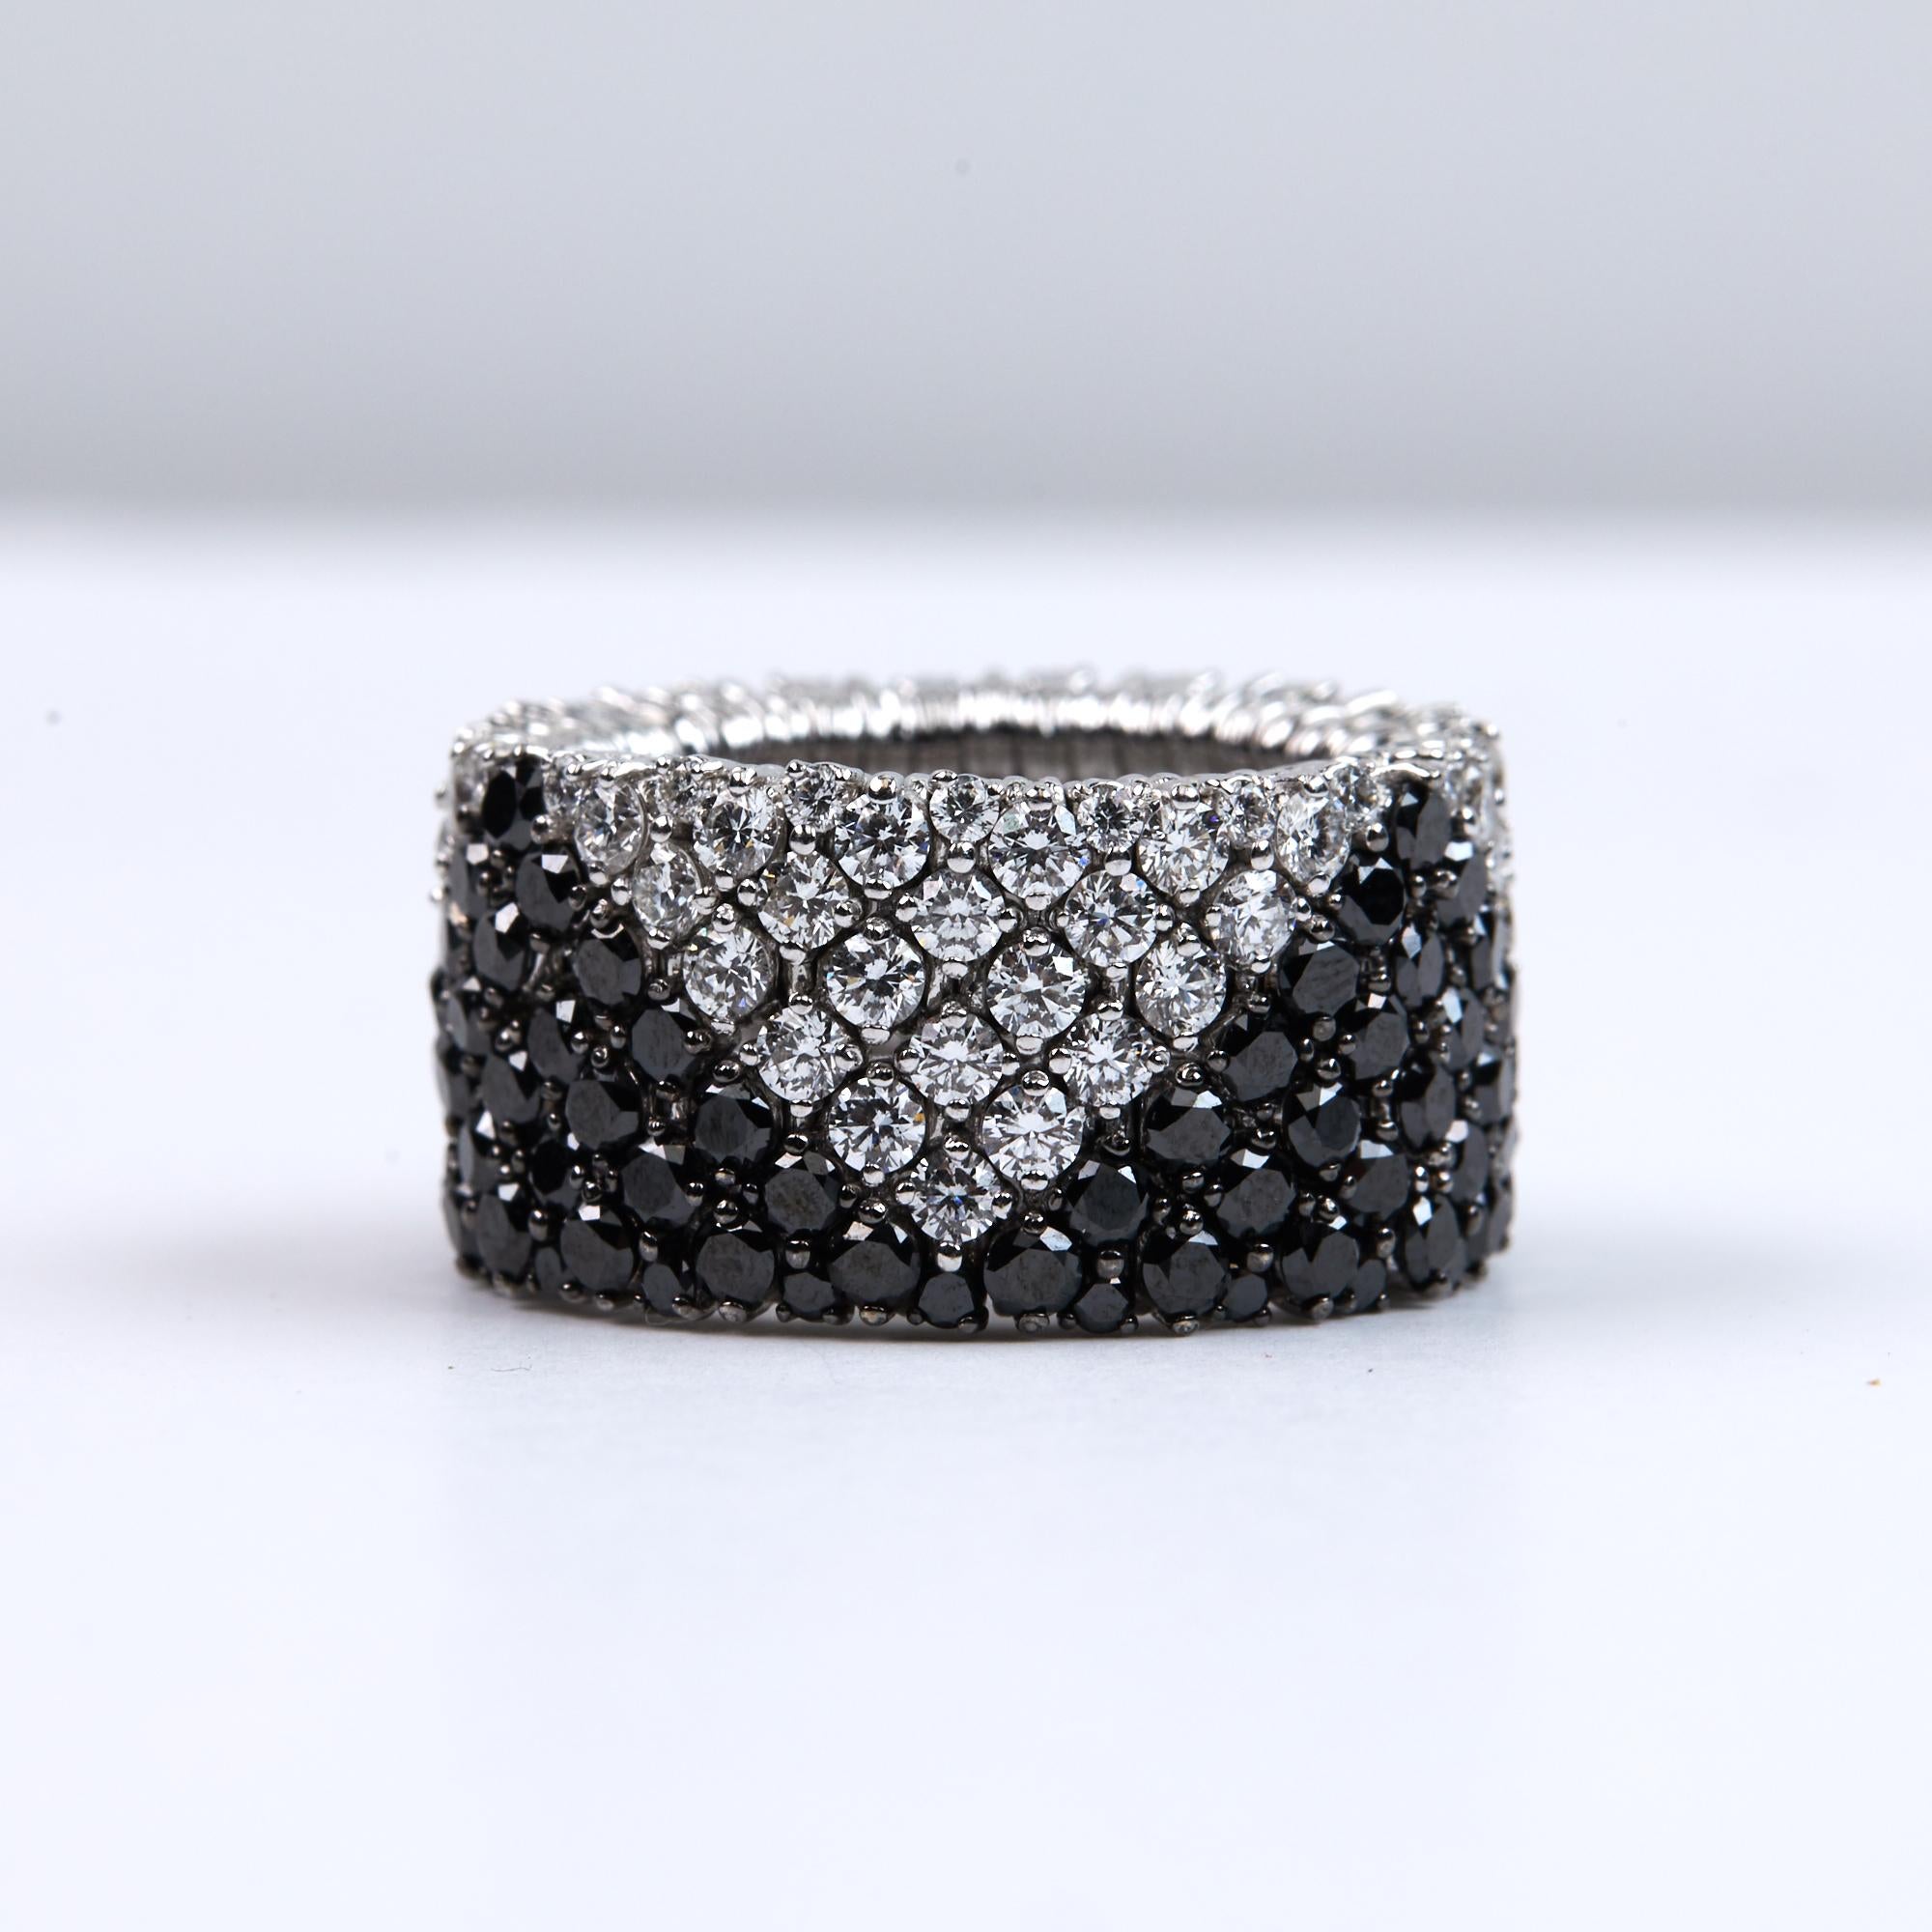 Expandable and Flexible Fit Black and White Diamond Band Ring. This large stretch ring has 4.47 carats of Brilliant round Cut Diamonds and an additional 3.30 carats of Brilliant Round White Diamonds set in a geometrical pattern. The diamonds are F-G